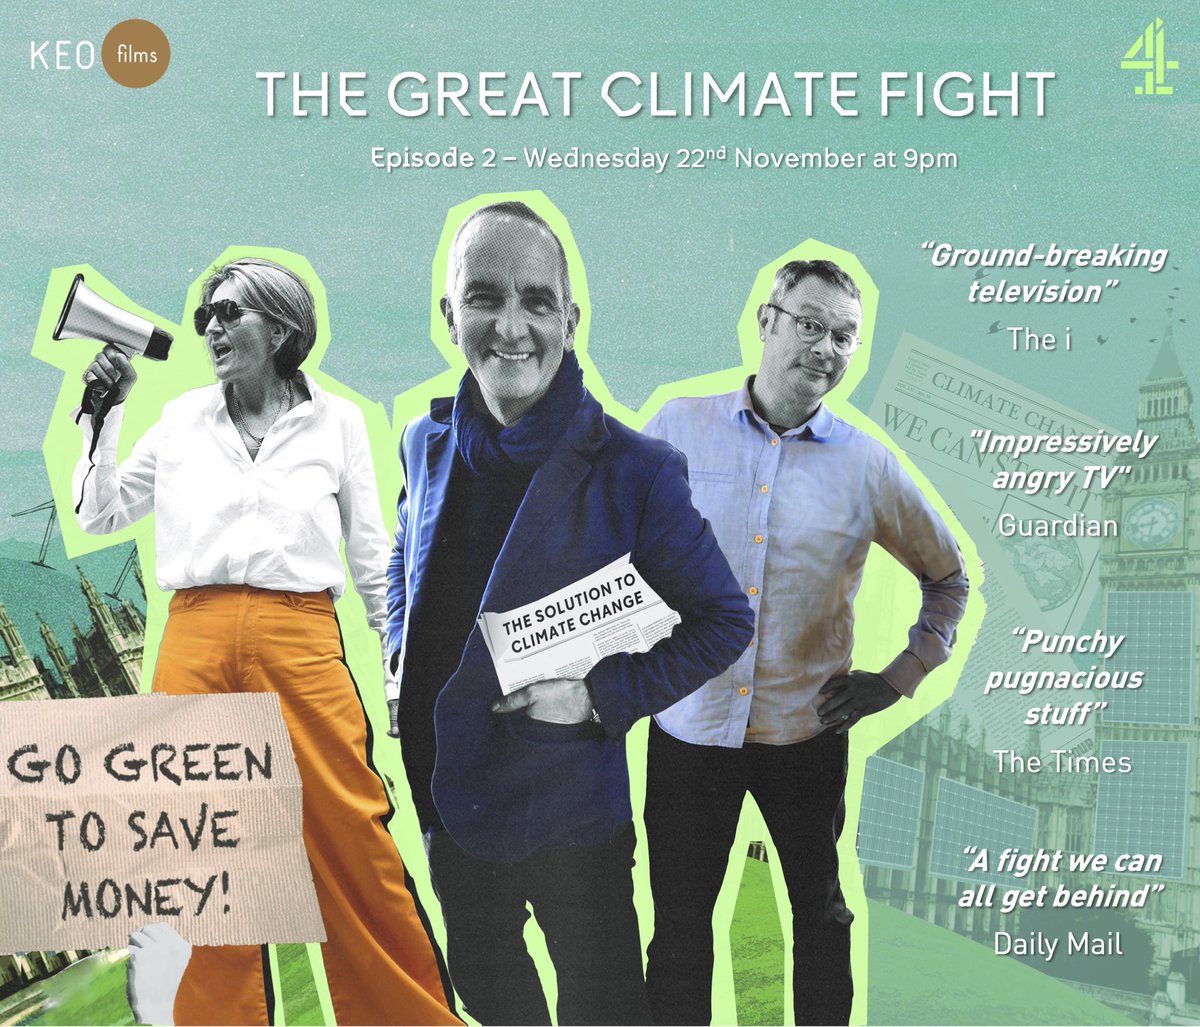 🚨The Great Climate Fight is a MUST-WATCH‼️ Great public service from @Channel4 @maryportas @HughFW and @Kevin_McCloud 💚 #climatefight #ClimateAction channel4.com/programmes/the…